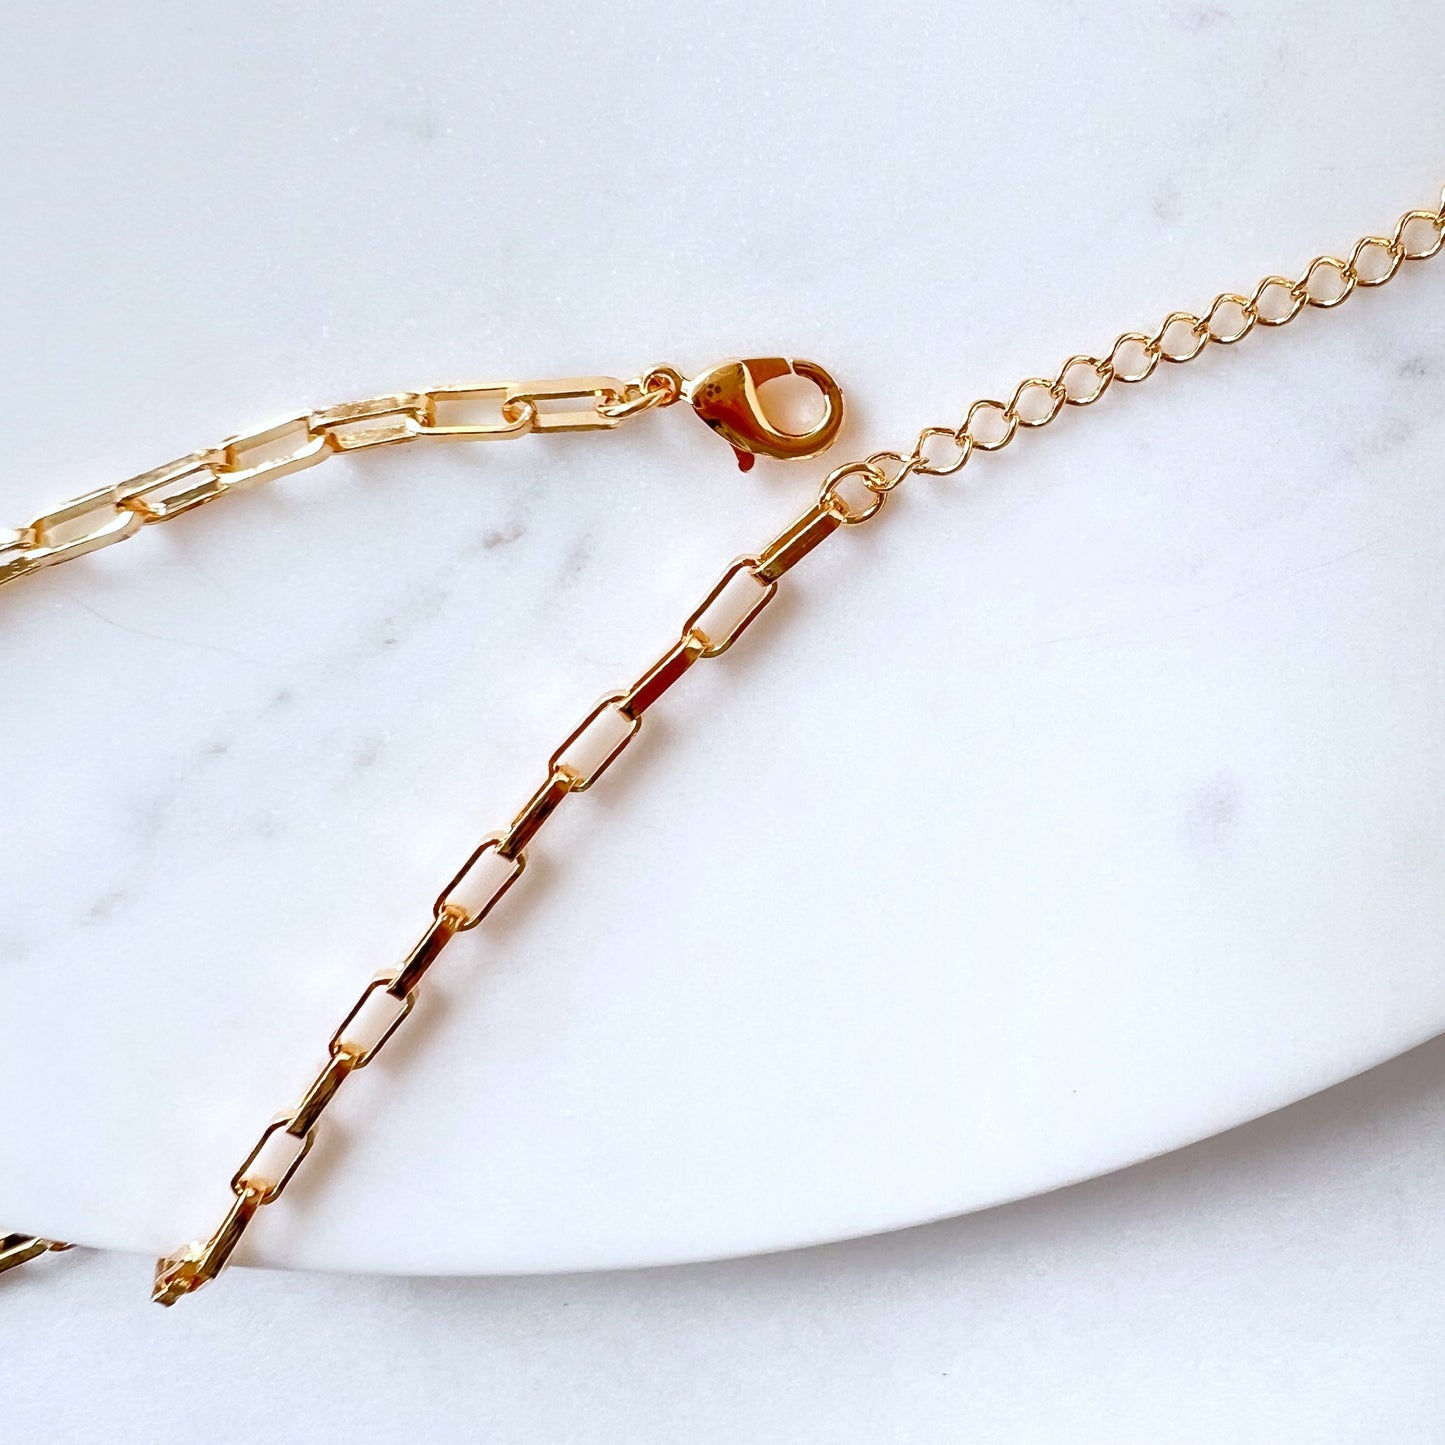 Link Chain Necklace - 3mm